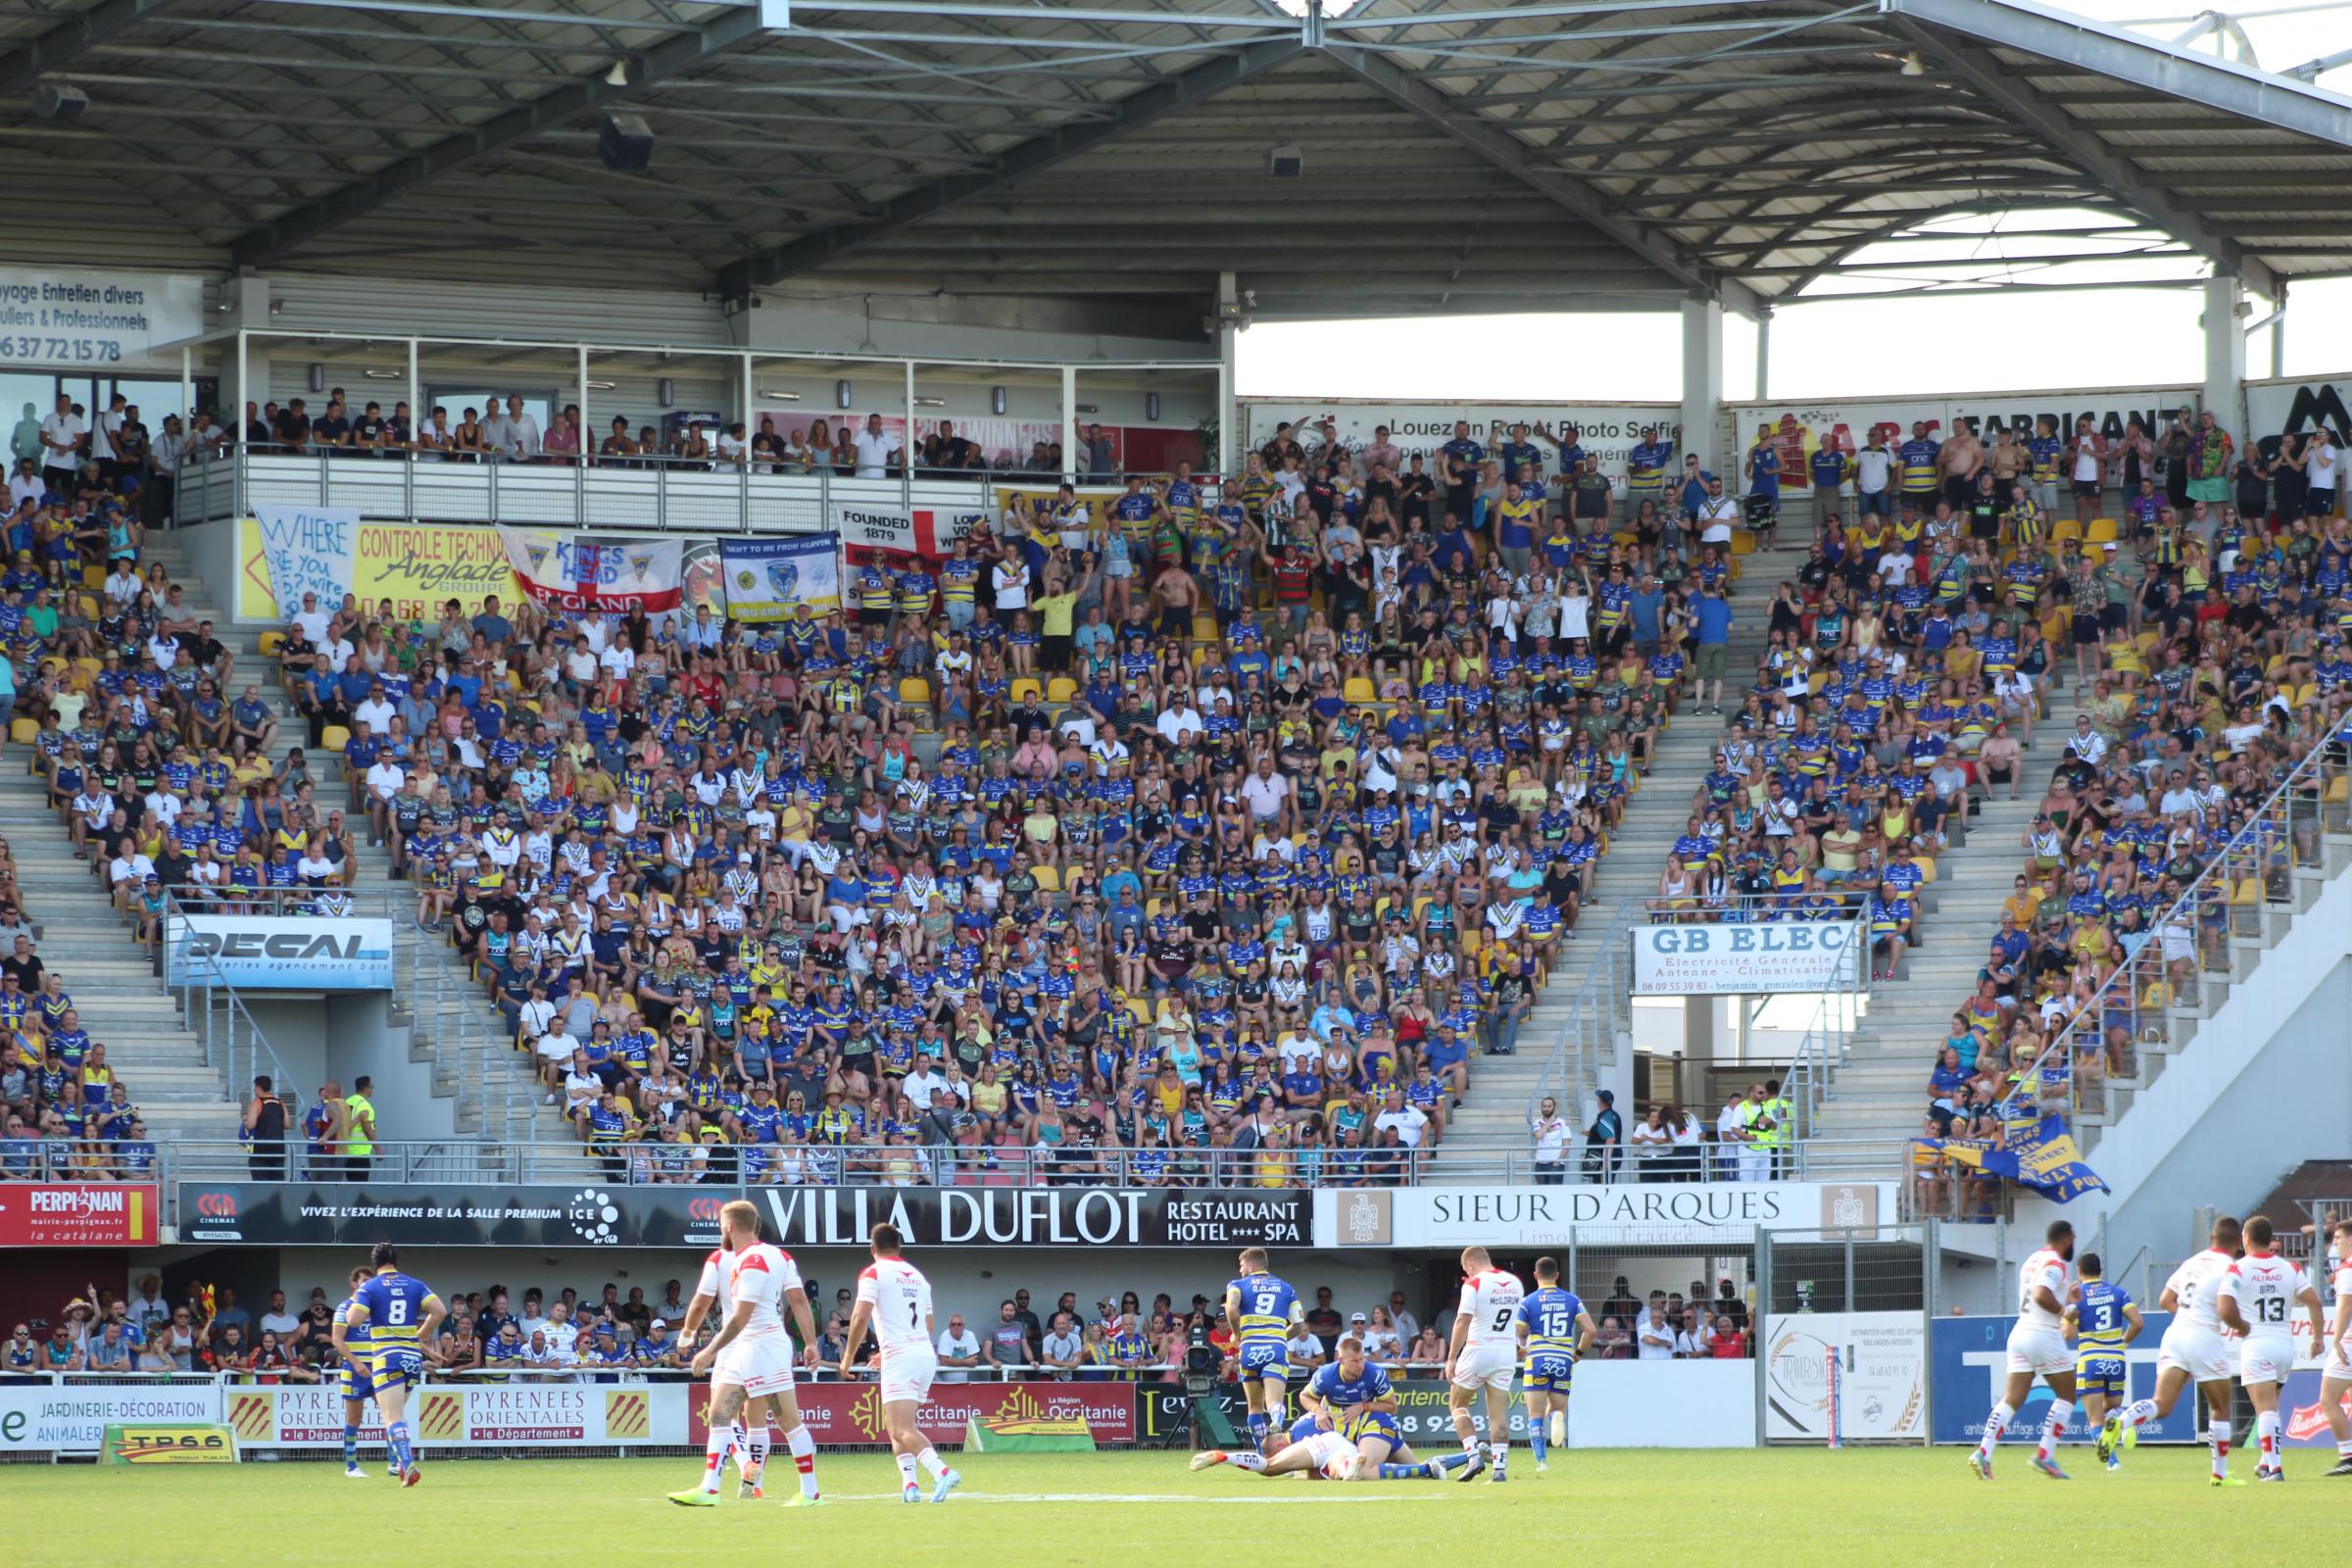 The Wire have not played in Perpignan since August 2019.